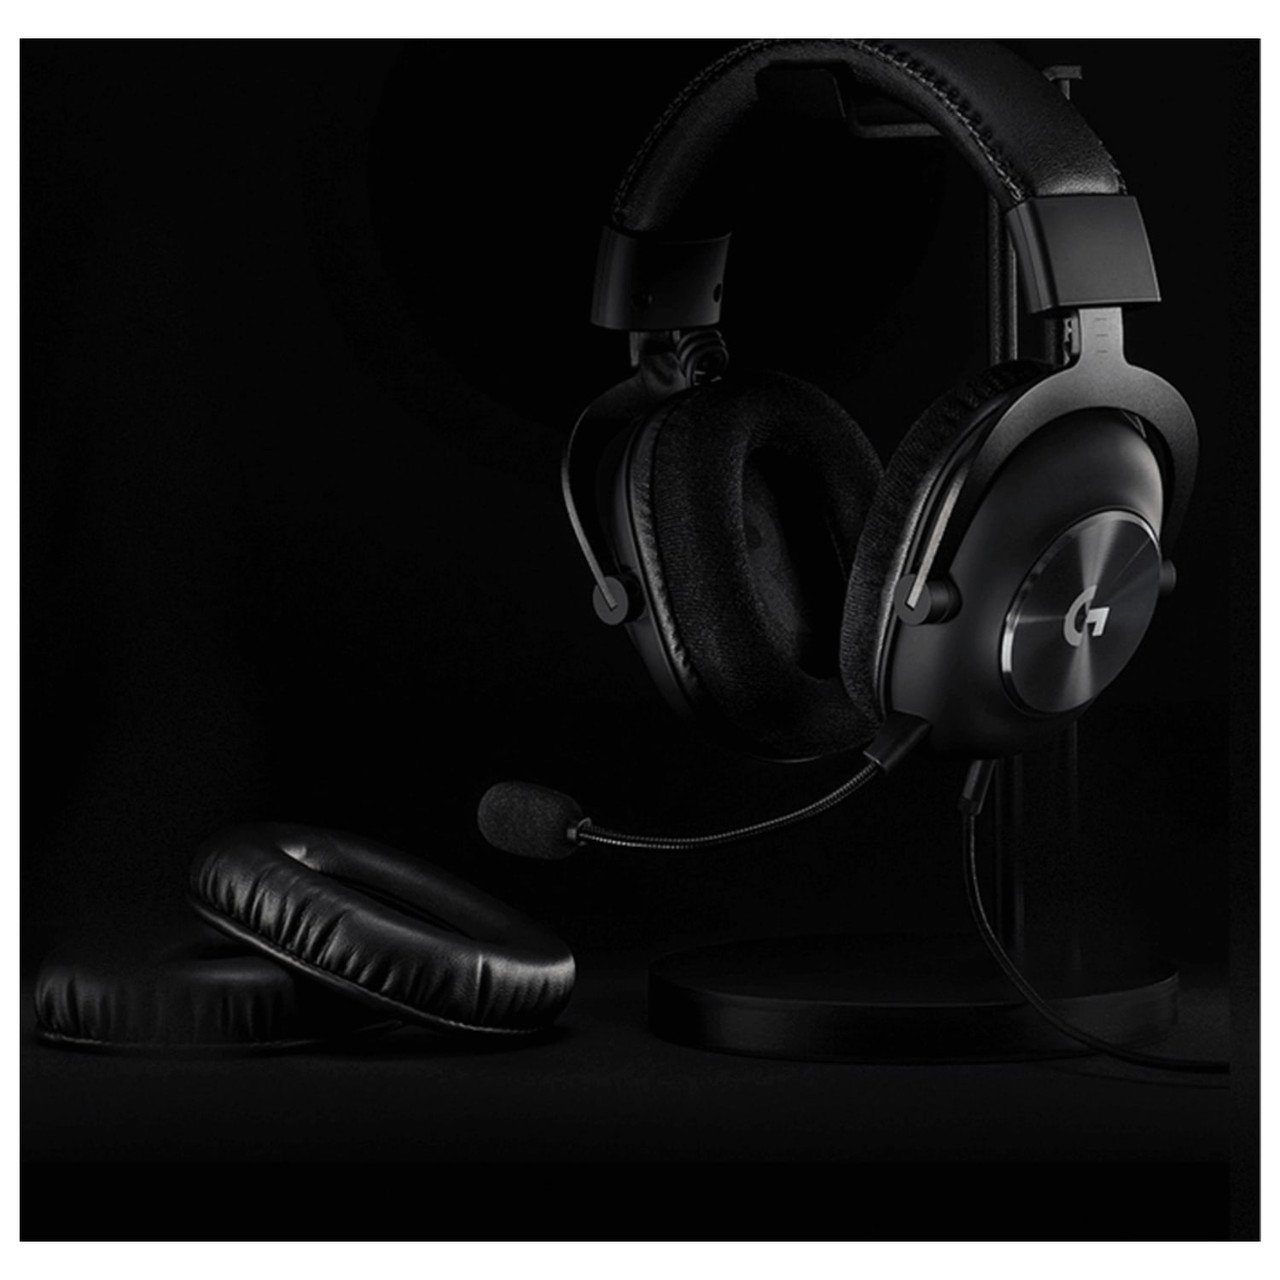 Logitech G Pro X Gaming Headset - Wired